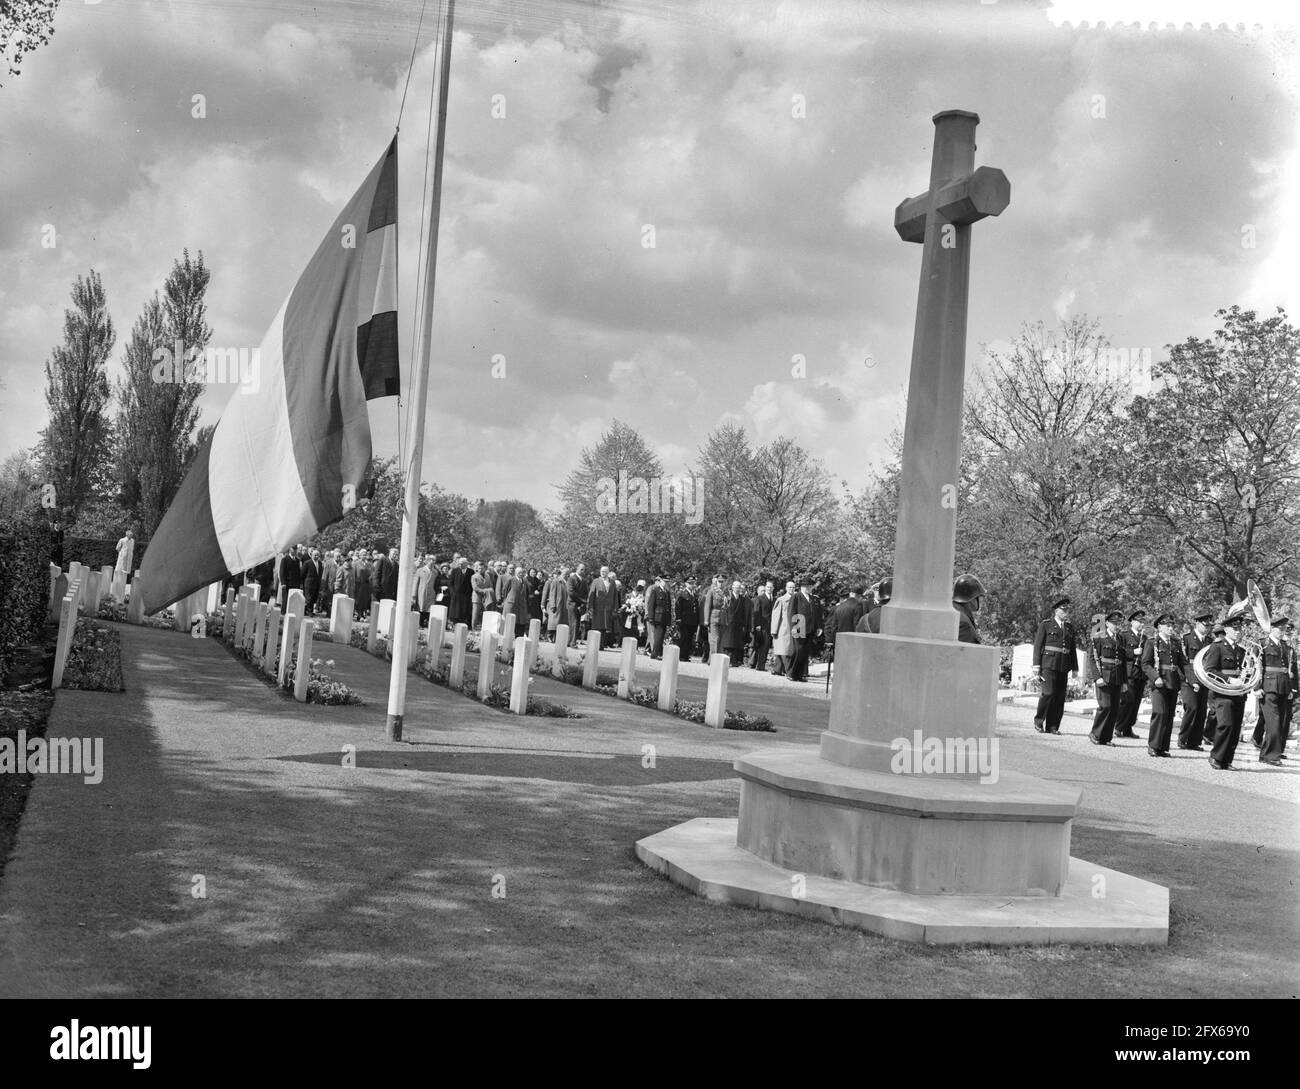 Commemoration of the fallen from the Second World War at the New Ooster Cemetery, mayor Van Hall lays a wreath, preceded by the Amsterdamse, 4 May 1959, The Netherlands, 20th century press agency photo, news to remember, documentary, historic photography 1945-1990, visual stories, human history of the Twentieth Century, capturing moments in time Stock Photo